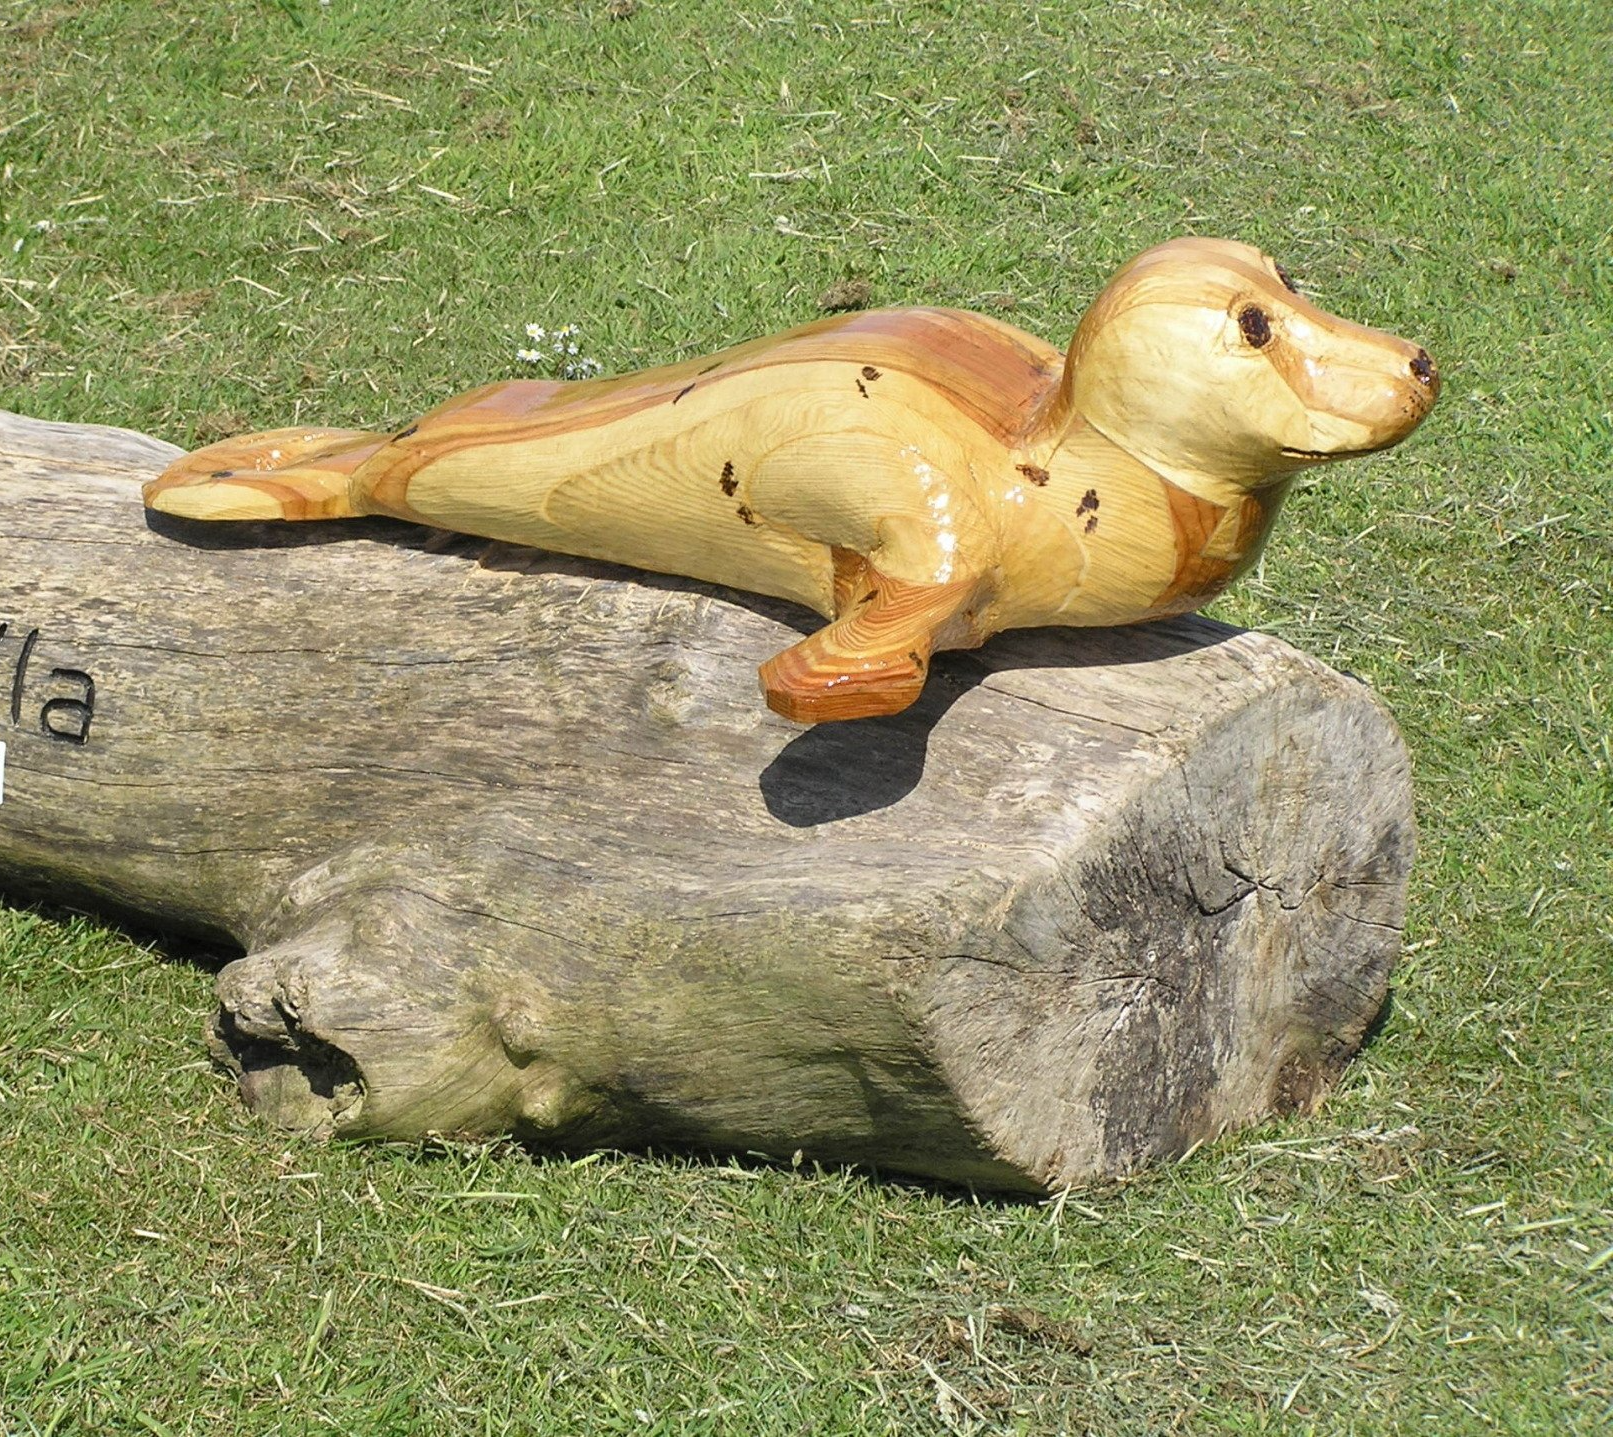 Life size wooden sculpture of a seal pup